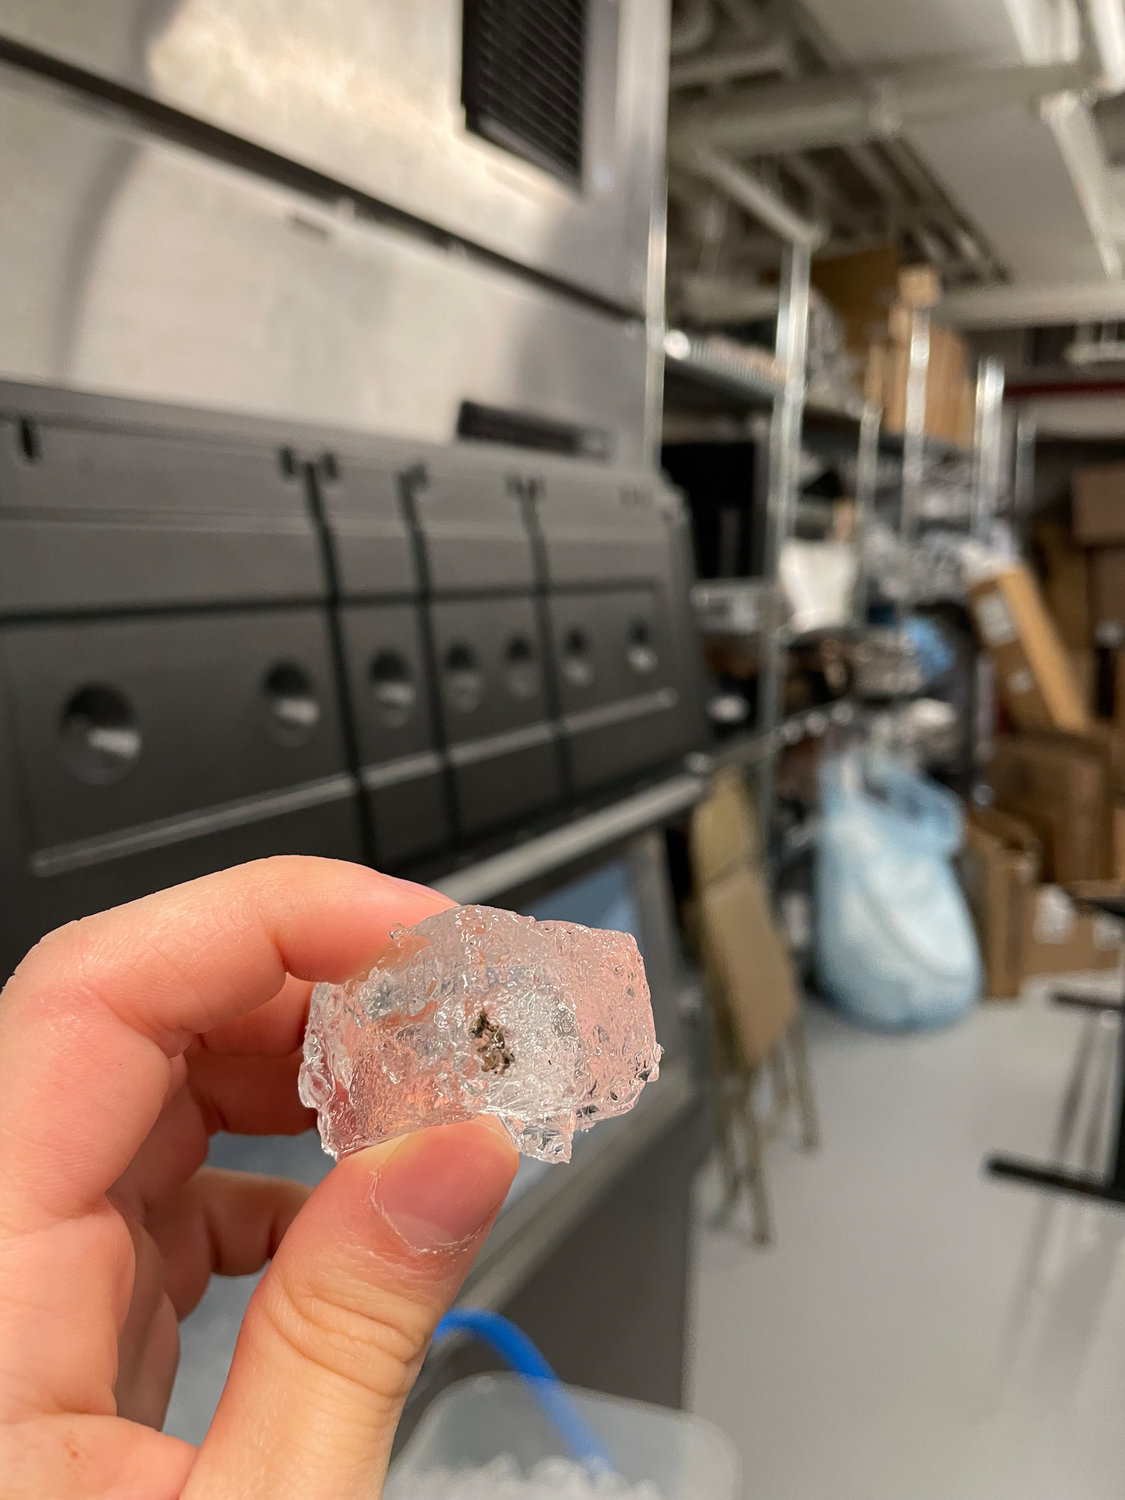 A Starbucks worker recently held up what the barista said was ice dotted with mold taken from a machine at the Meatpacking District Reserve Roastery. A recent inspection report makes no note of “mold like residues” that inspectors found in the roastery’s ice machines during an initial inspection Nov. 9.